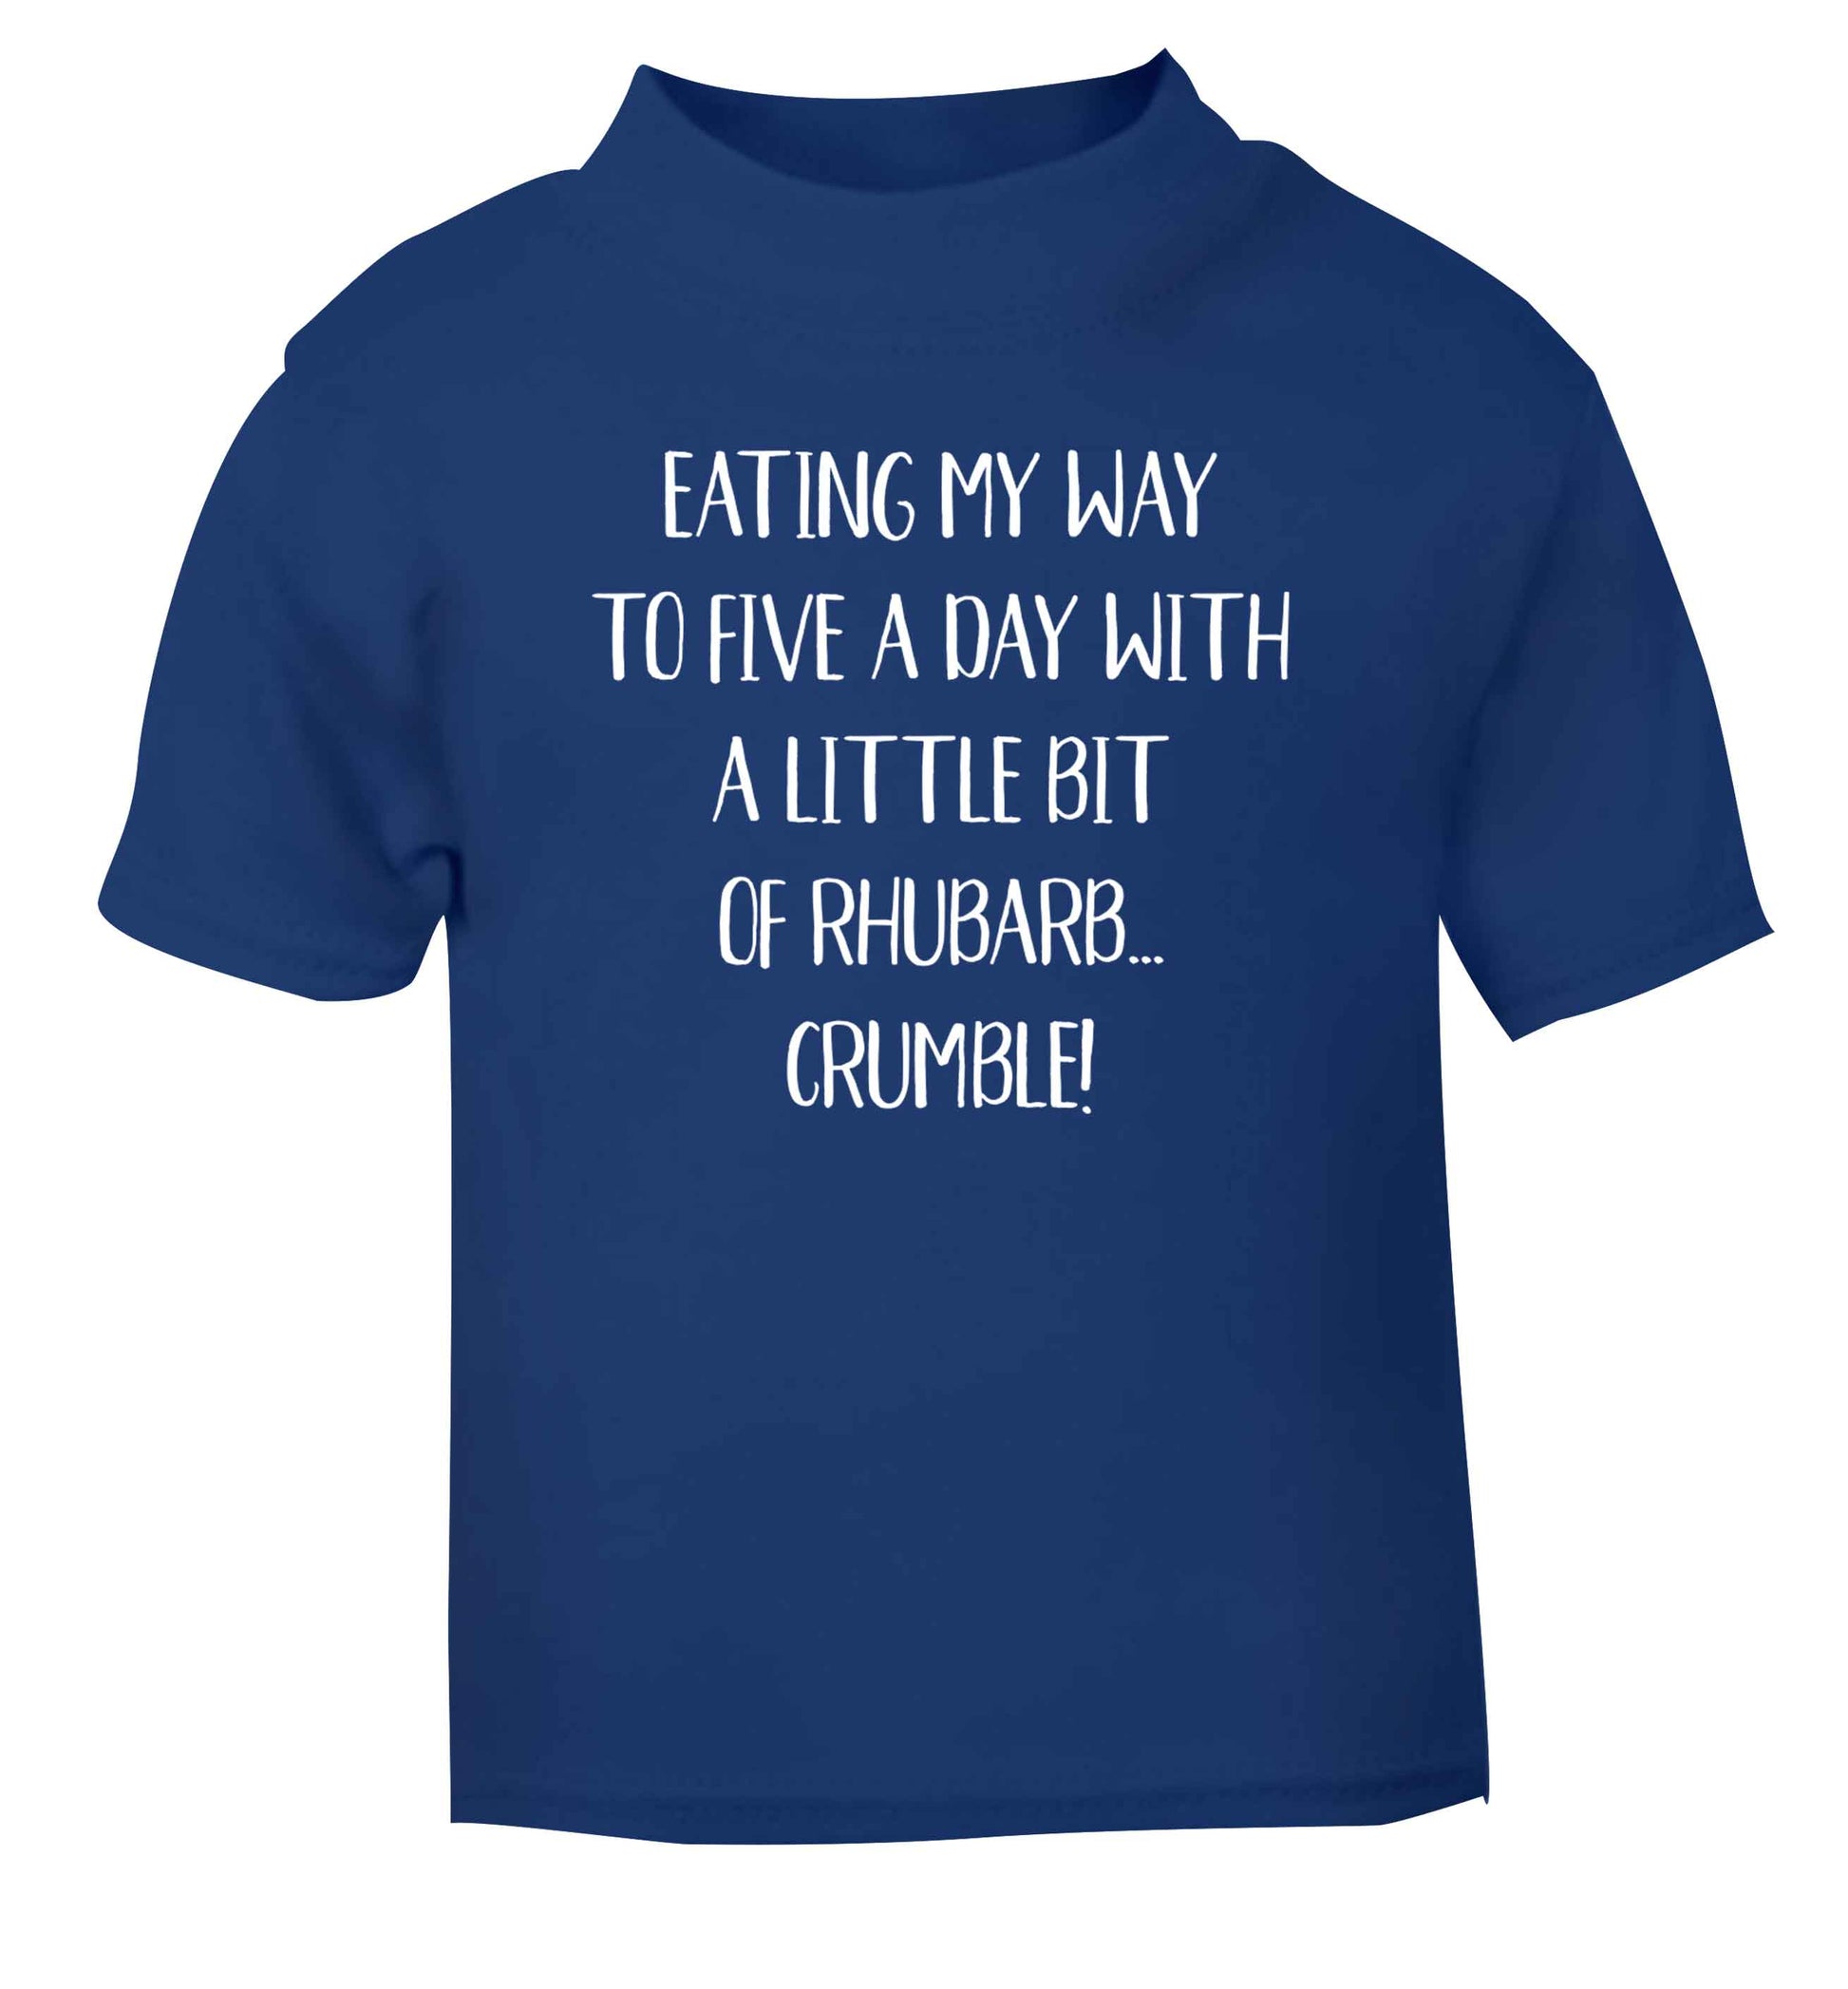 Eating my way to five a day with a little bit of rhubarb crumble blue Baby Toddler Tshirt 2 Years